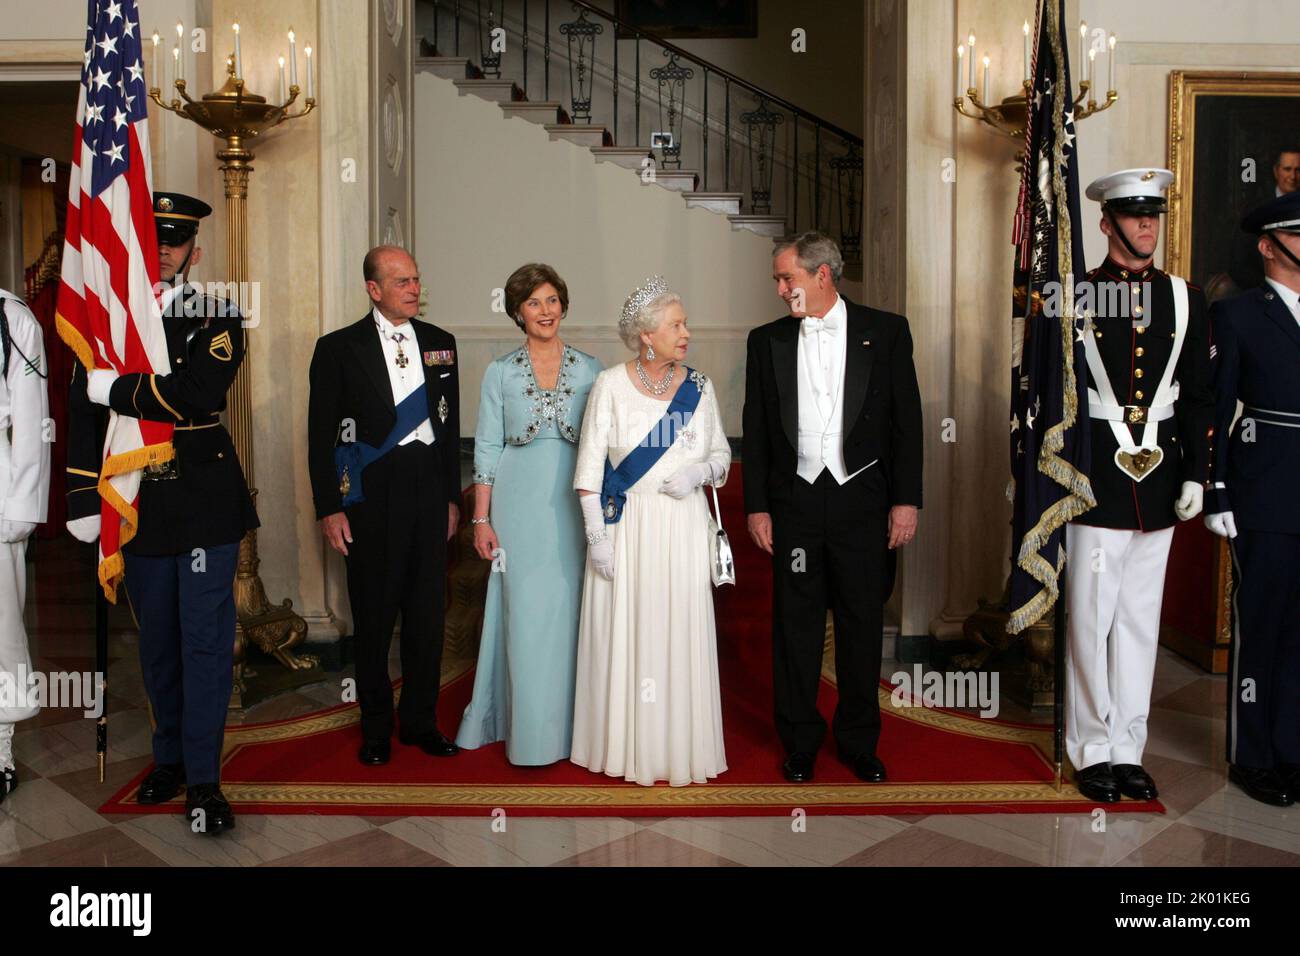 President George W. Bush and Mrs. Laura Bush Escort Her Majesty Queen Elizabeth II and His Royal Highness The Prince Philip. Stock Photo